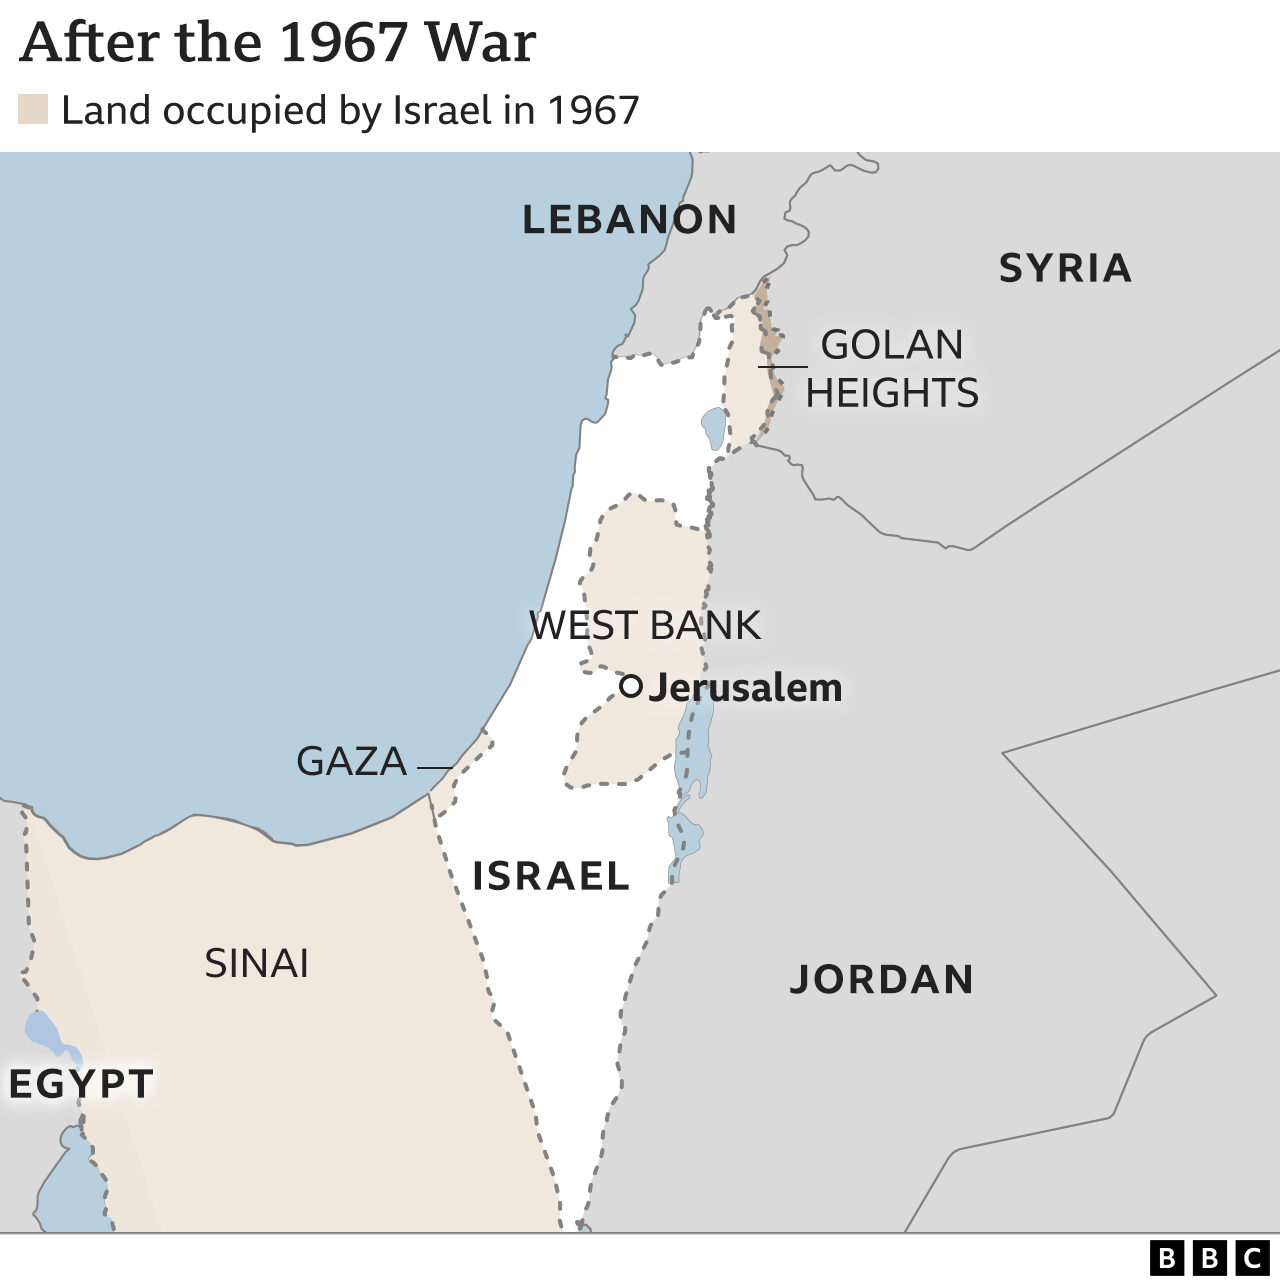 Map showing land occupied by Israel after 1967 war